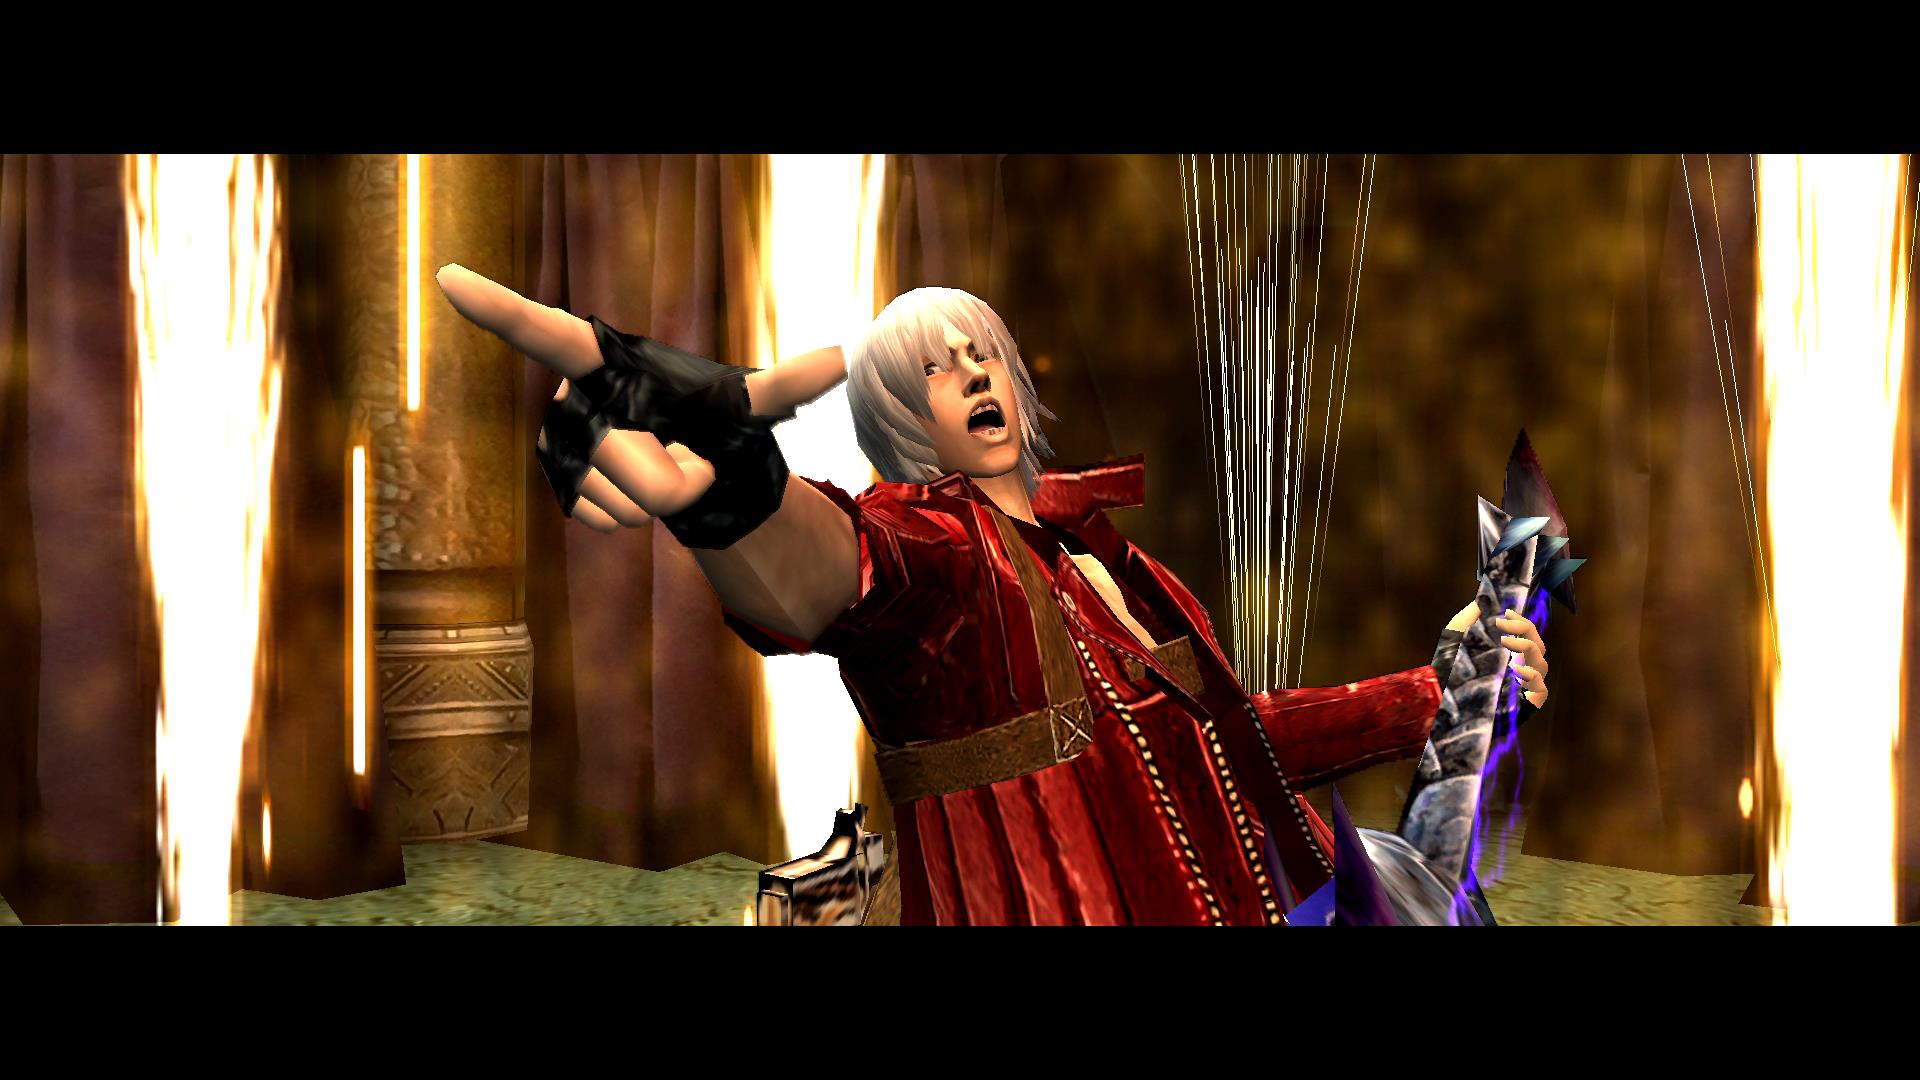 New Devil May Cry Game 2020, DMC3 Remake?